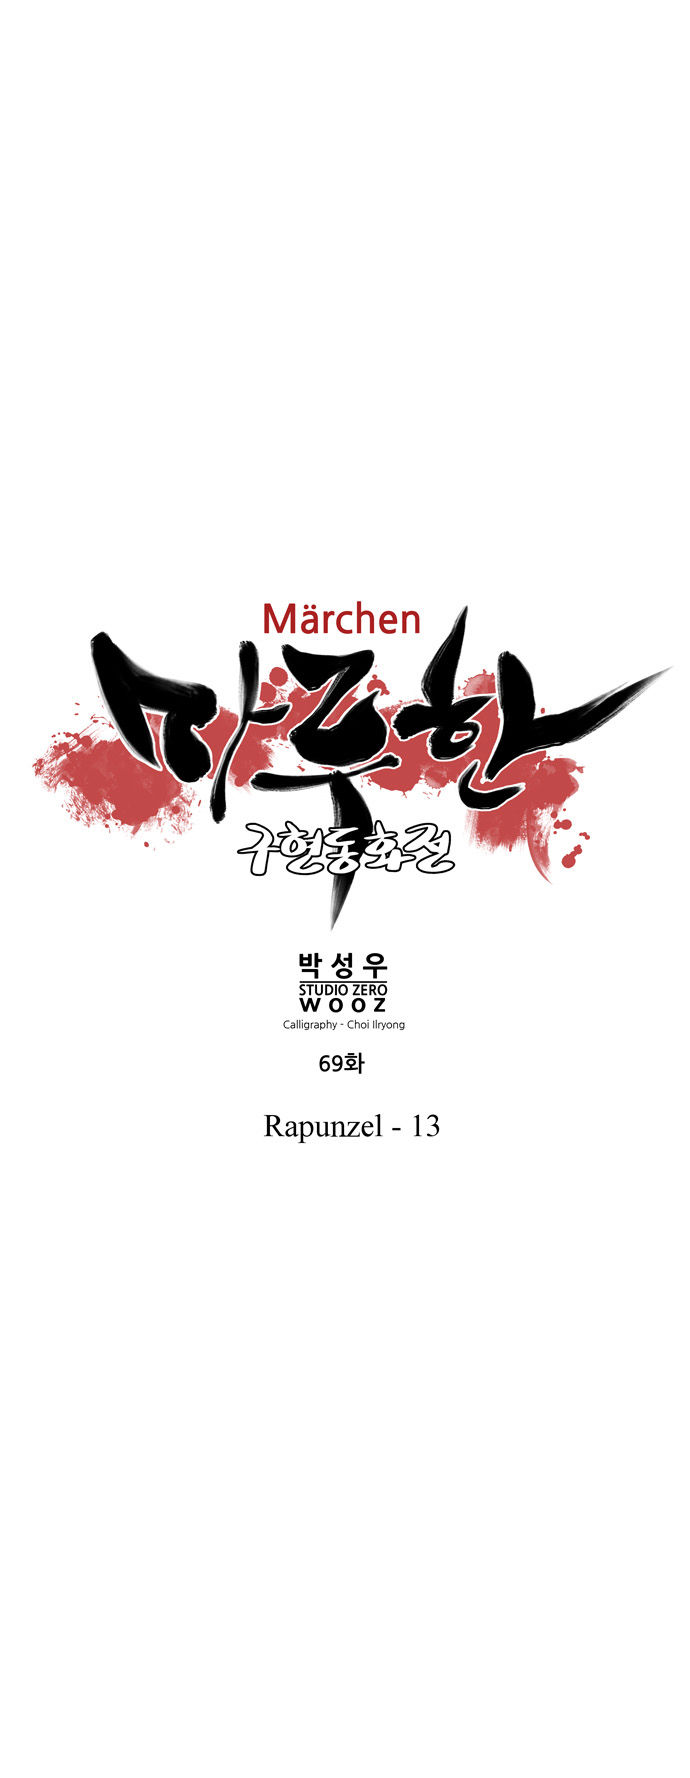 Marchen - The Embodiment of Tales 69